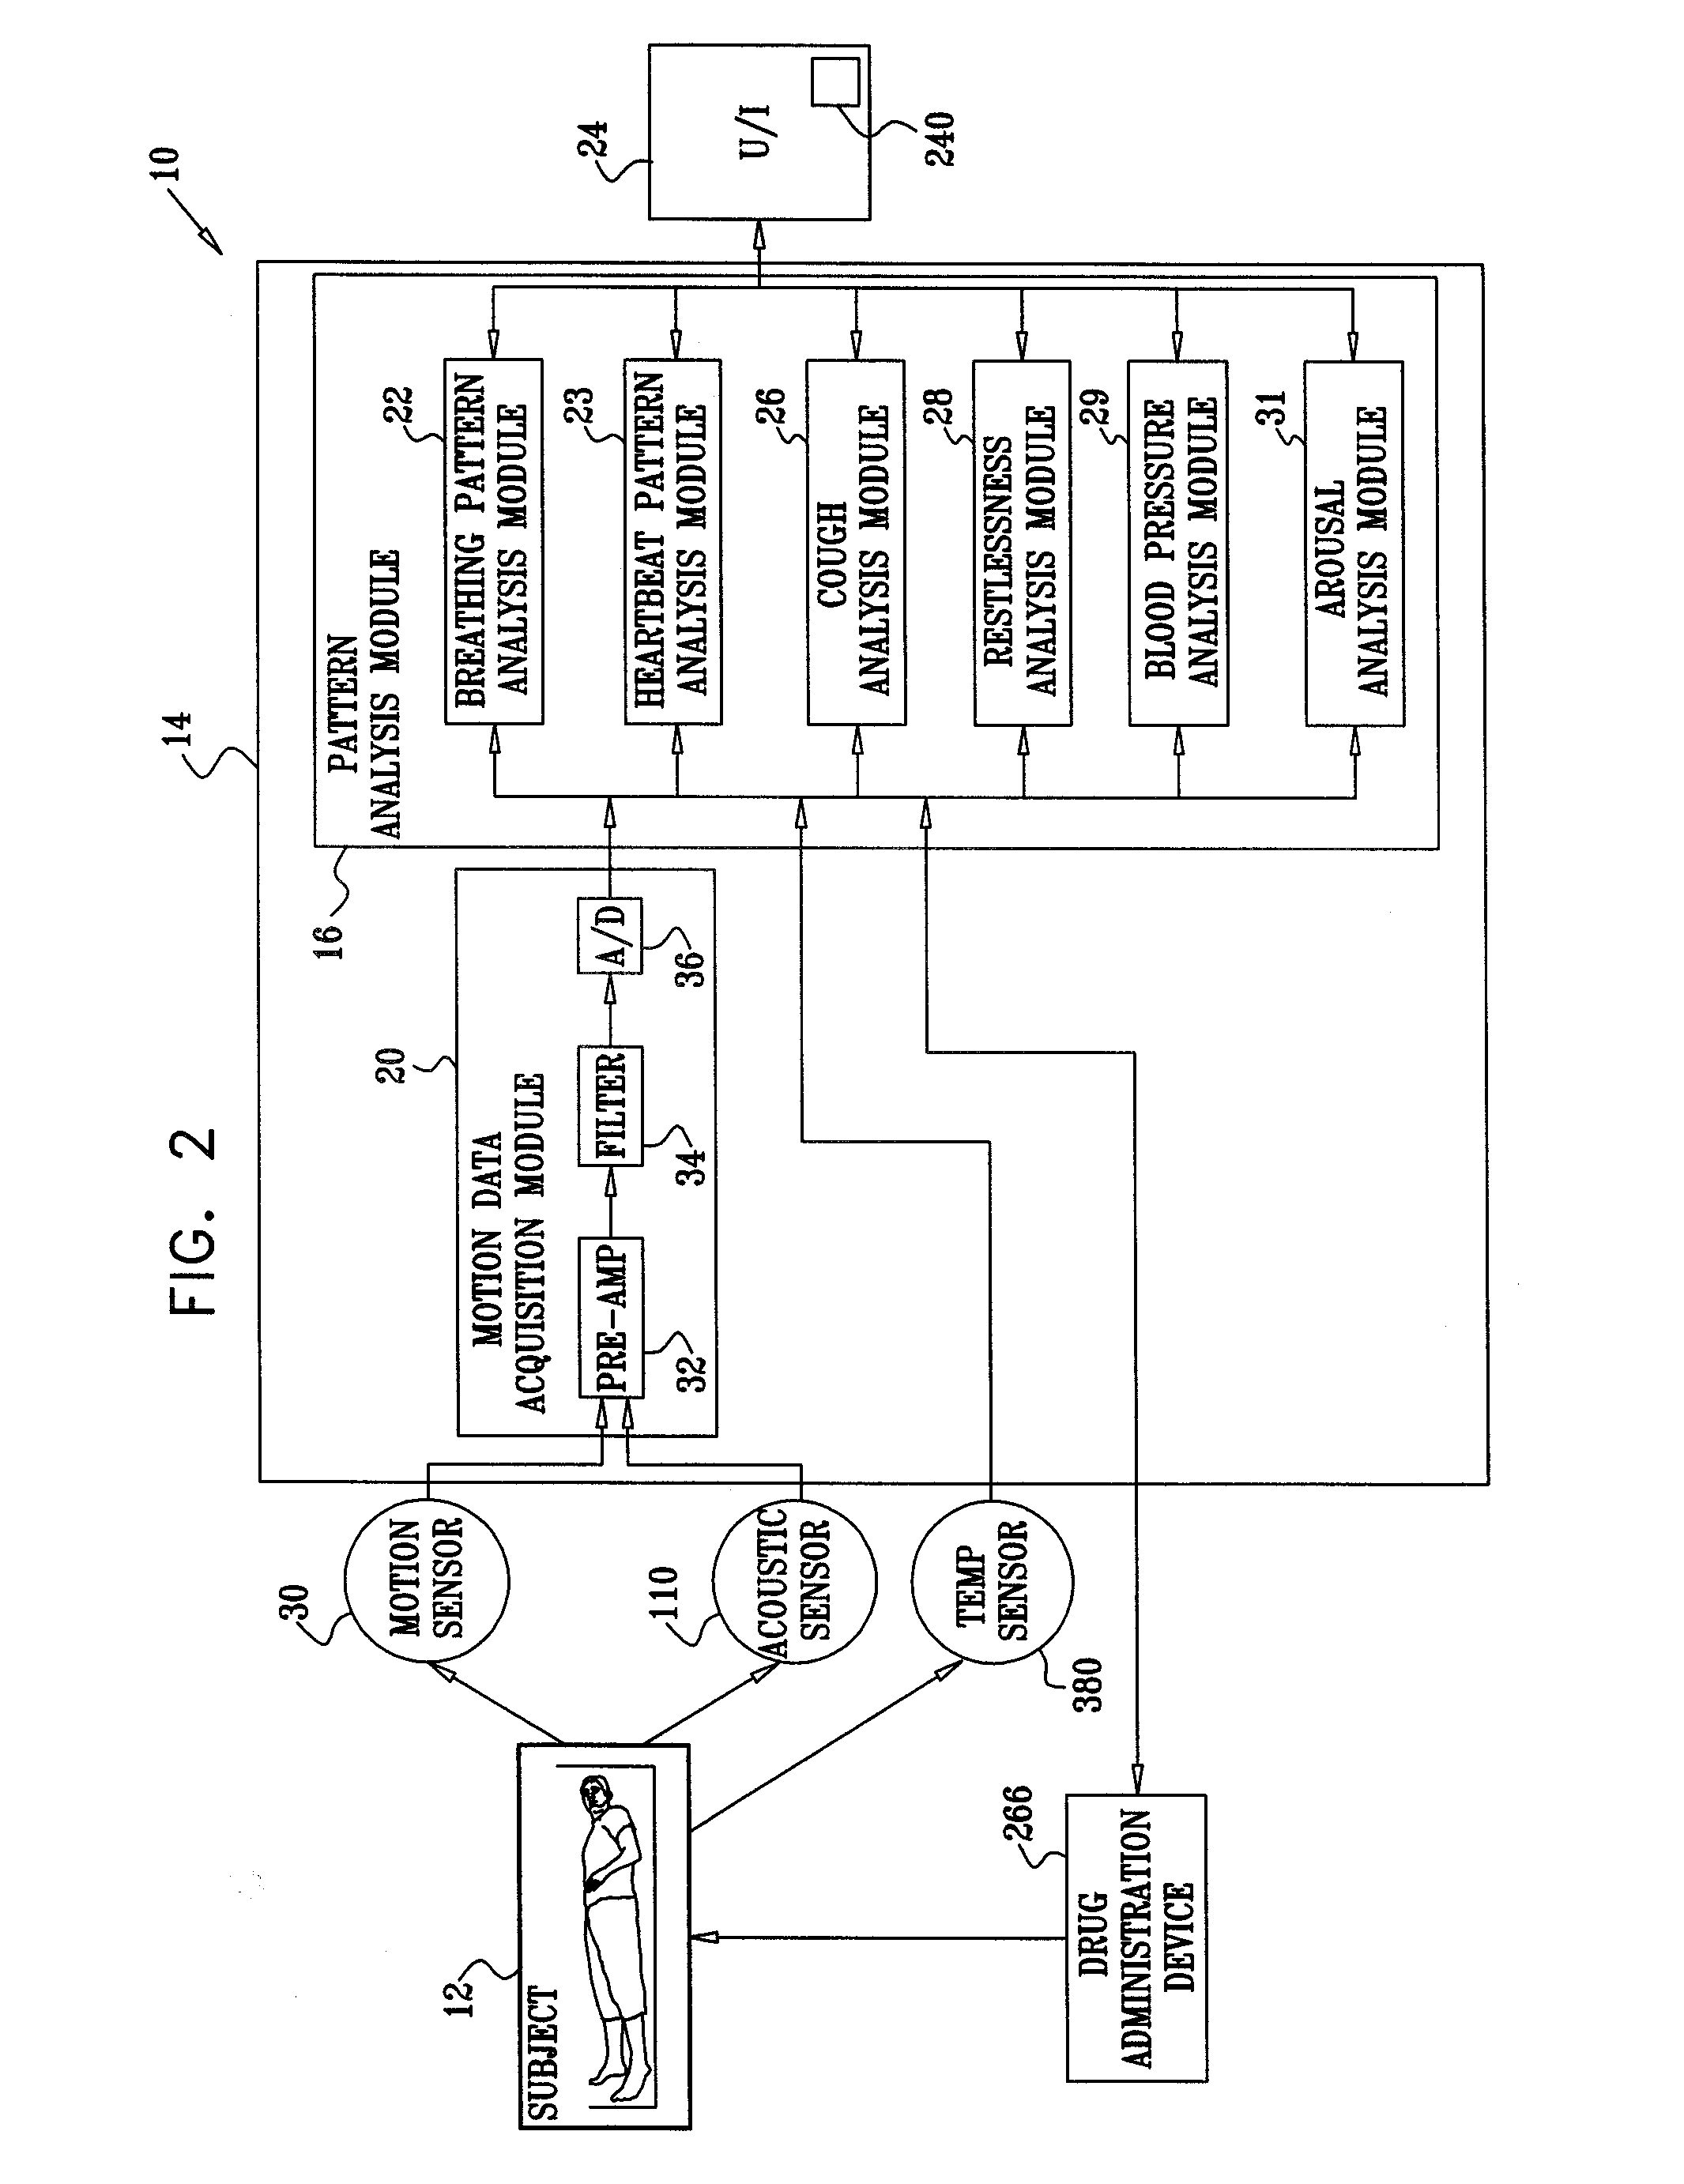 Methods and system for monitoring patients for clinical episodes